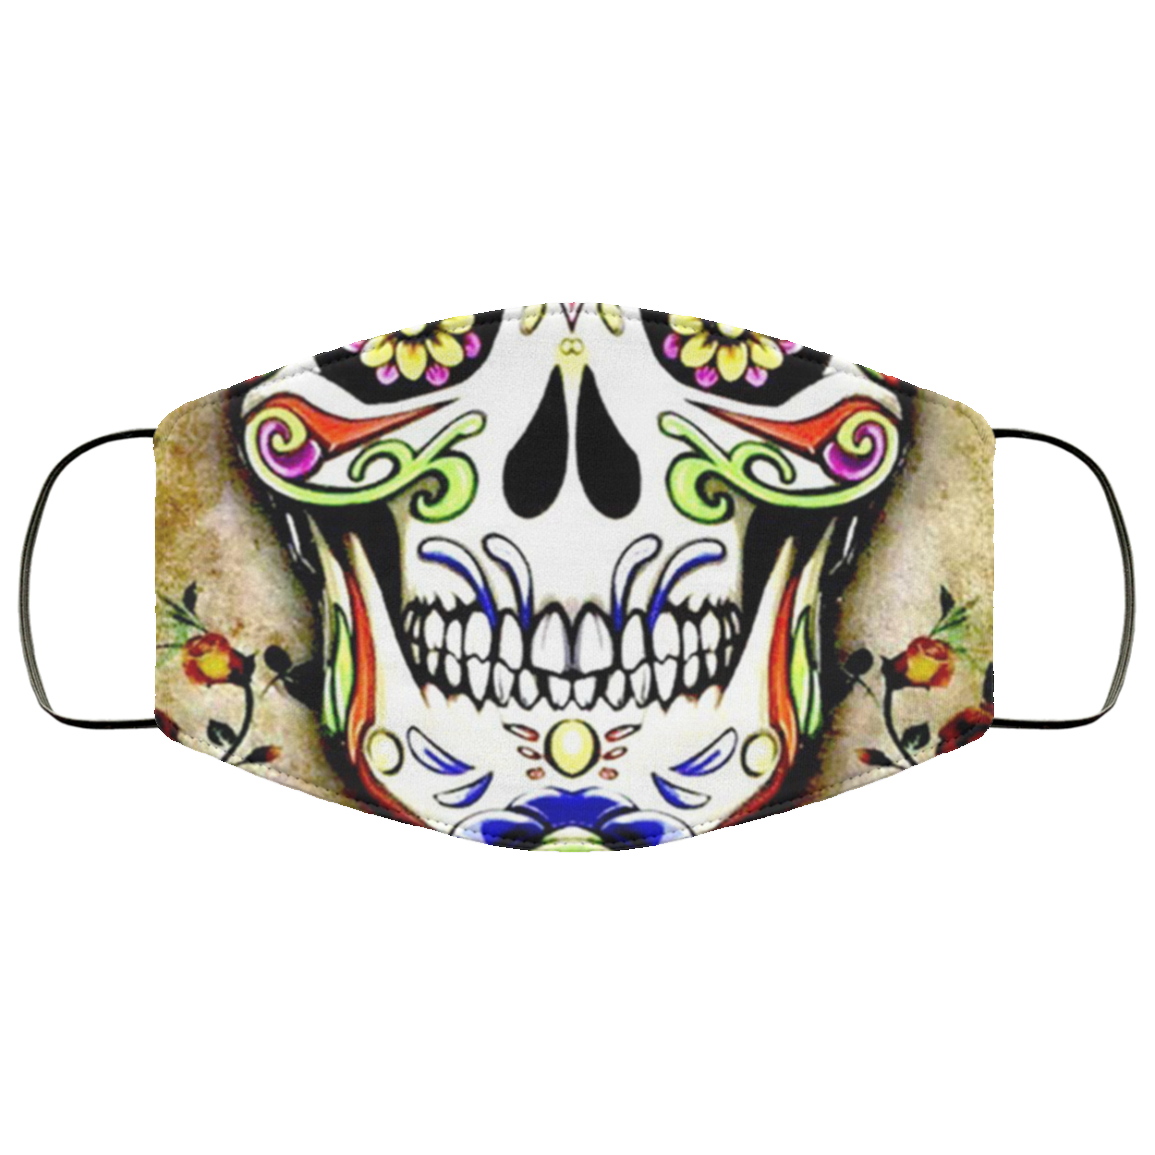 Day Of The Dead Skull Face Mask | Allbluetees.com